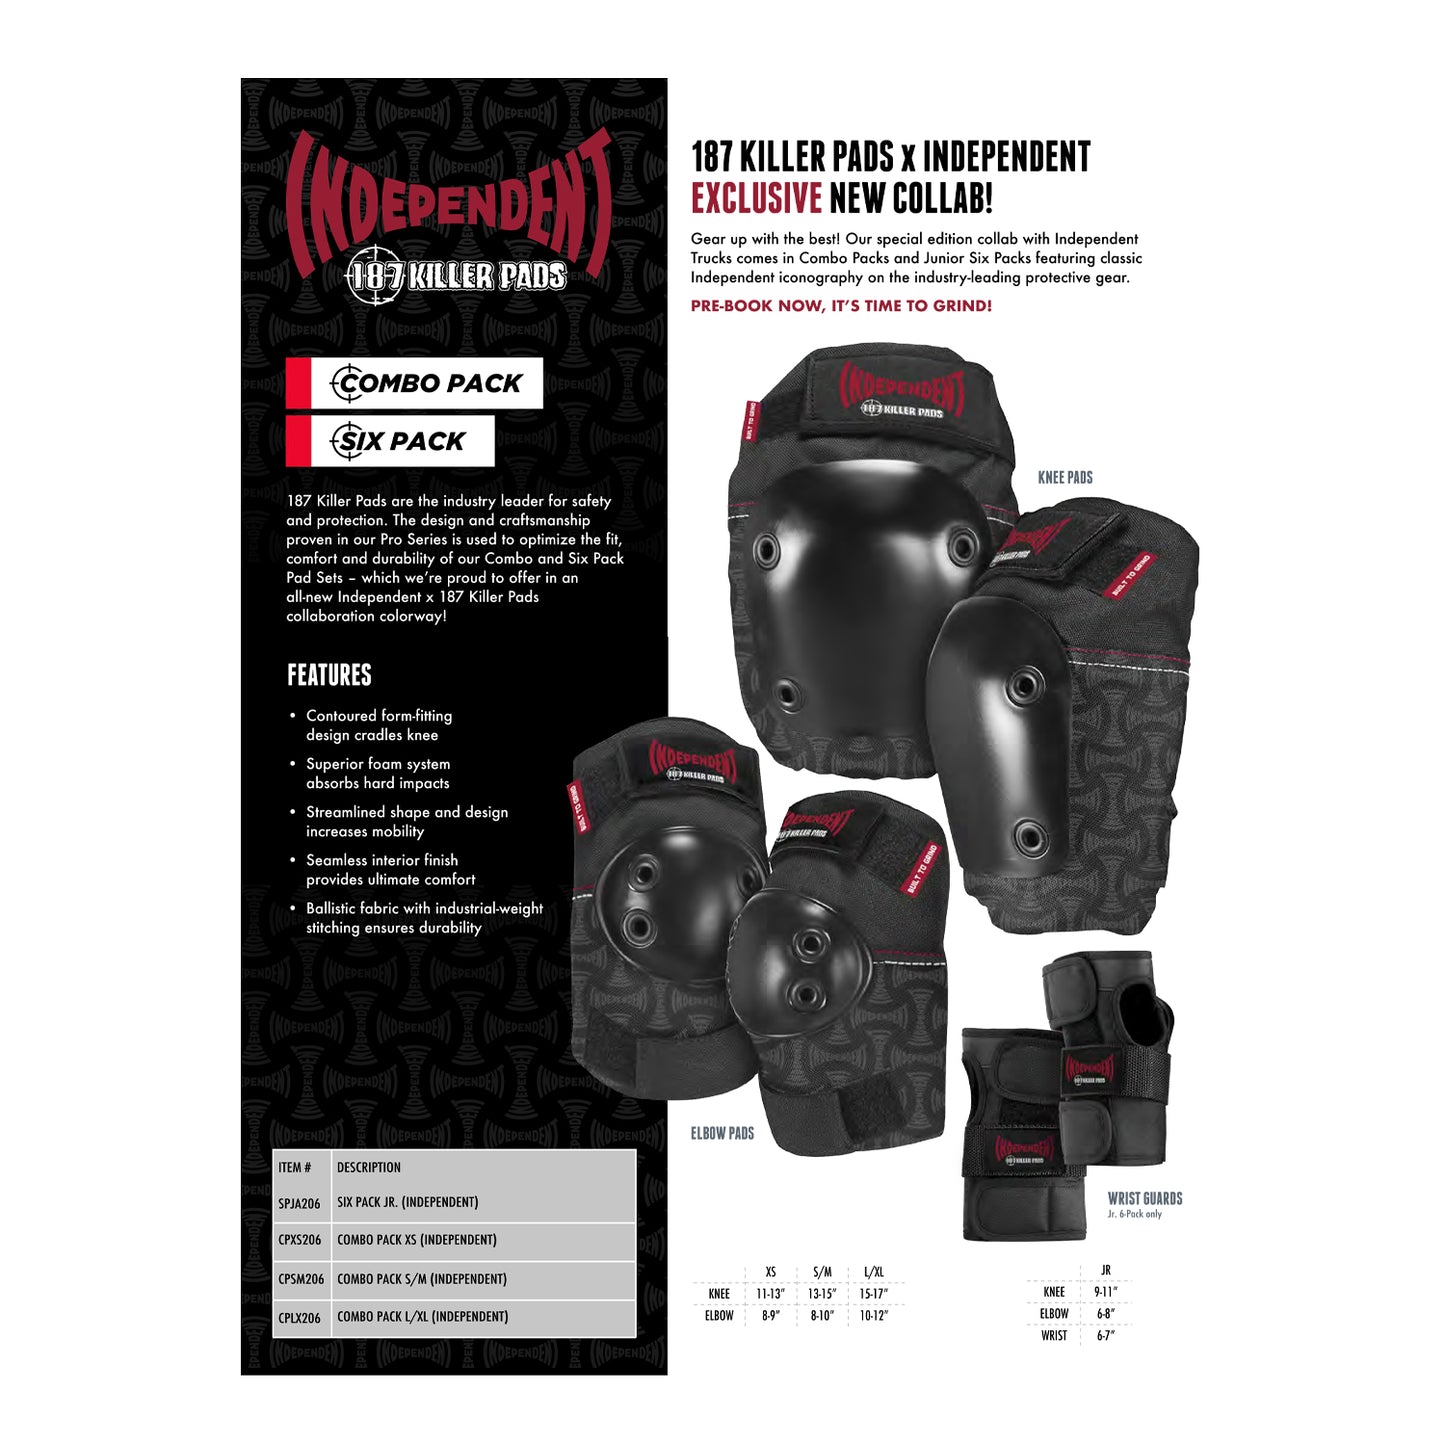 187 Killer Pads x Independent Six Pack HO23 Quick Strike - Prime Delux Store